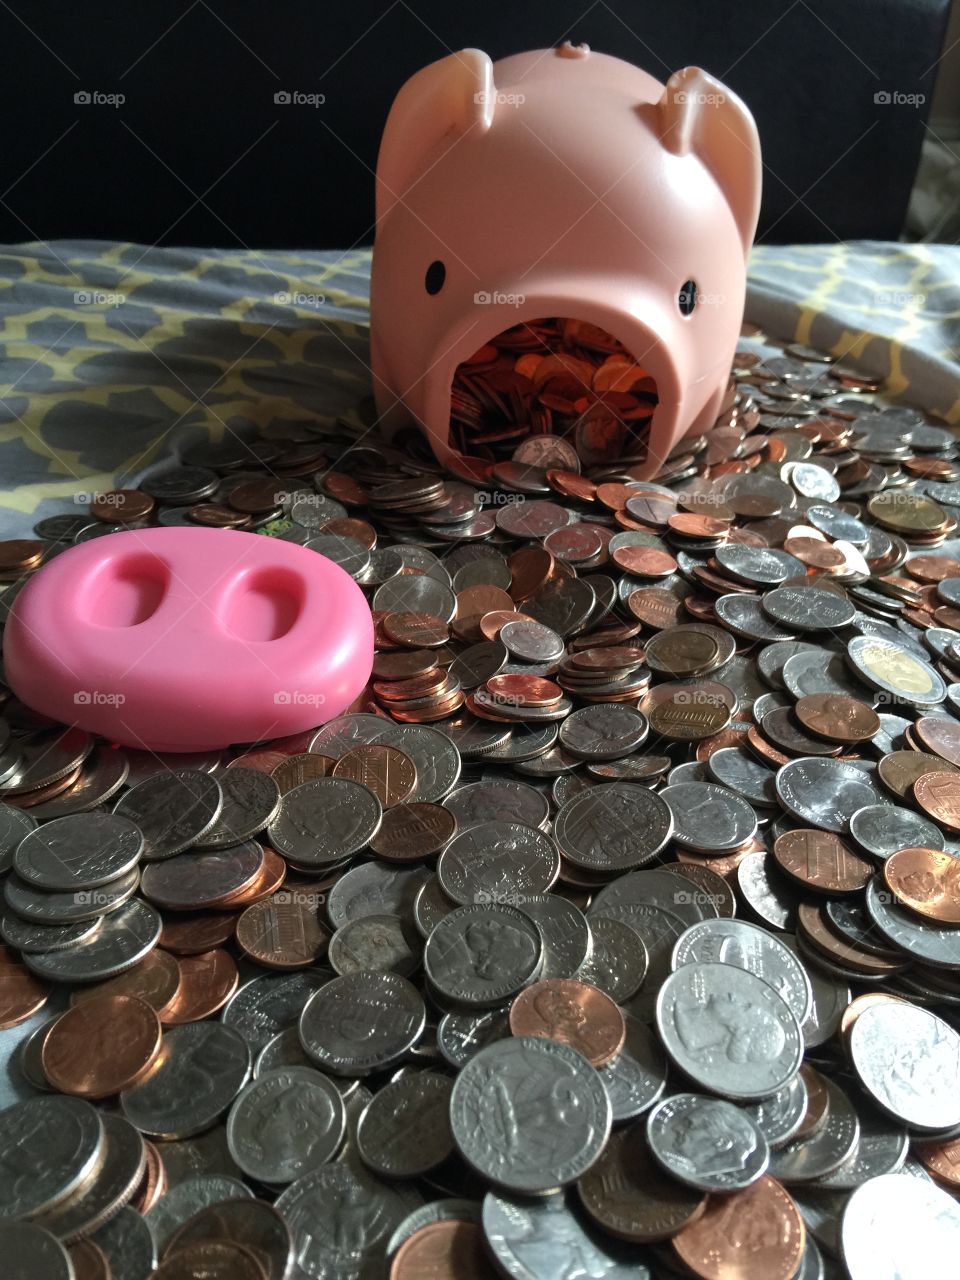 Coin Pig . Broke my Piggy bank open for its Coins